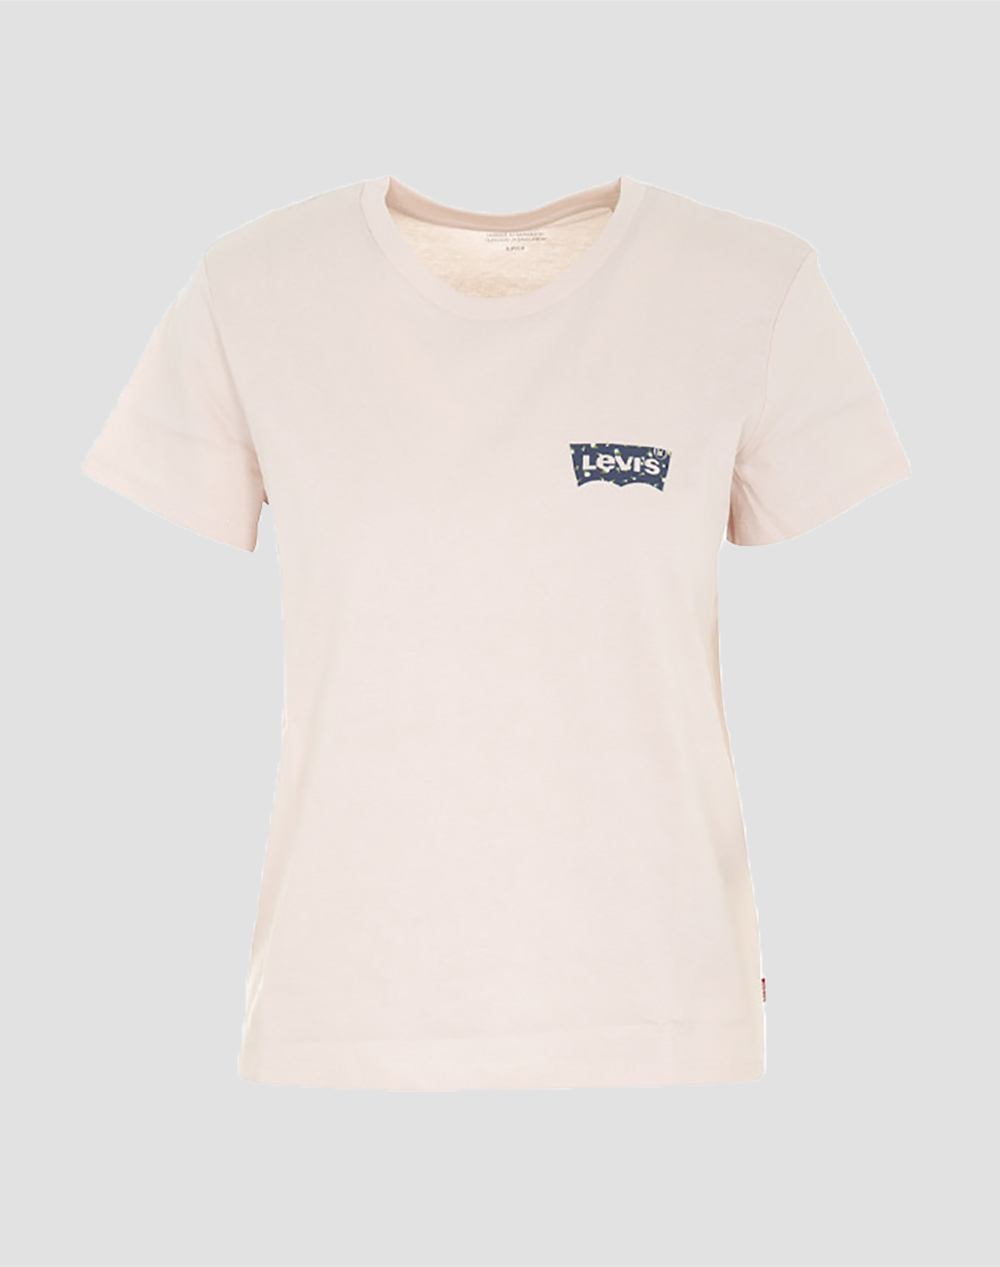 LEVIS THE PERFECT TEE 17369-2490-2490 LightPink